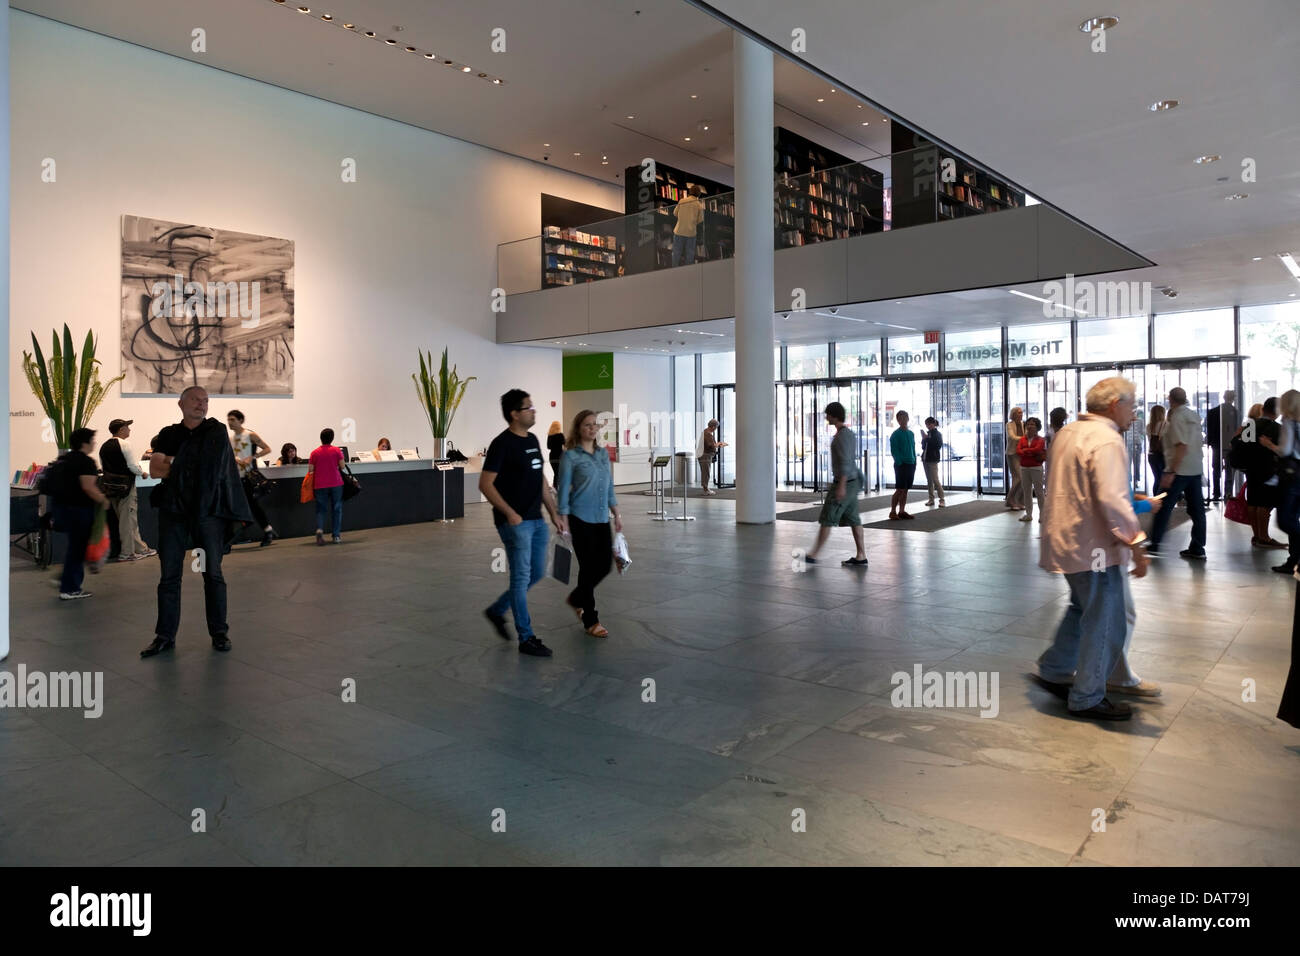 Entrance hall of Moma in New York City Stock Photo - Alamy